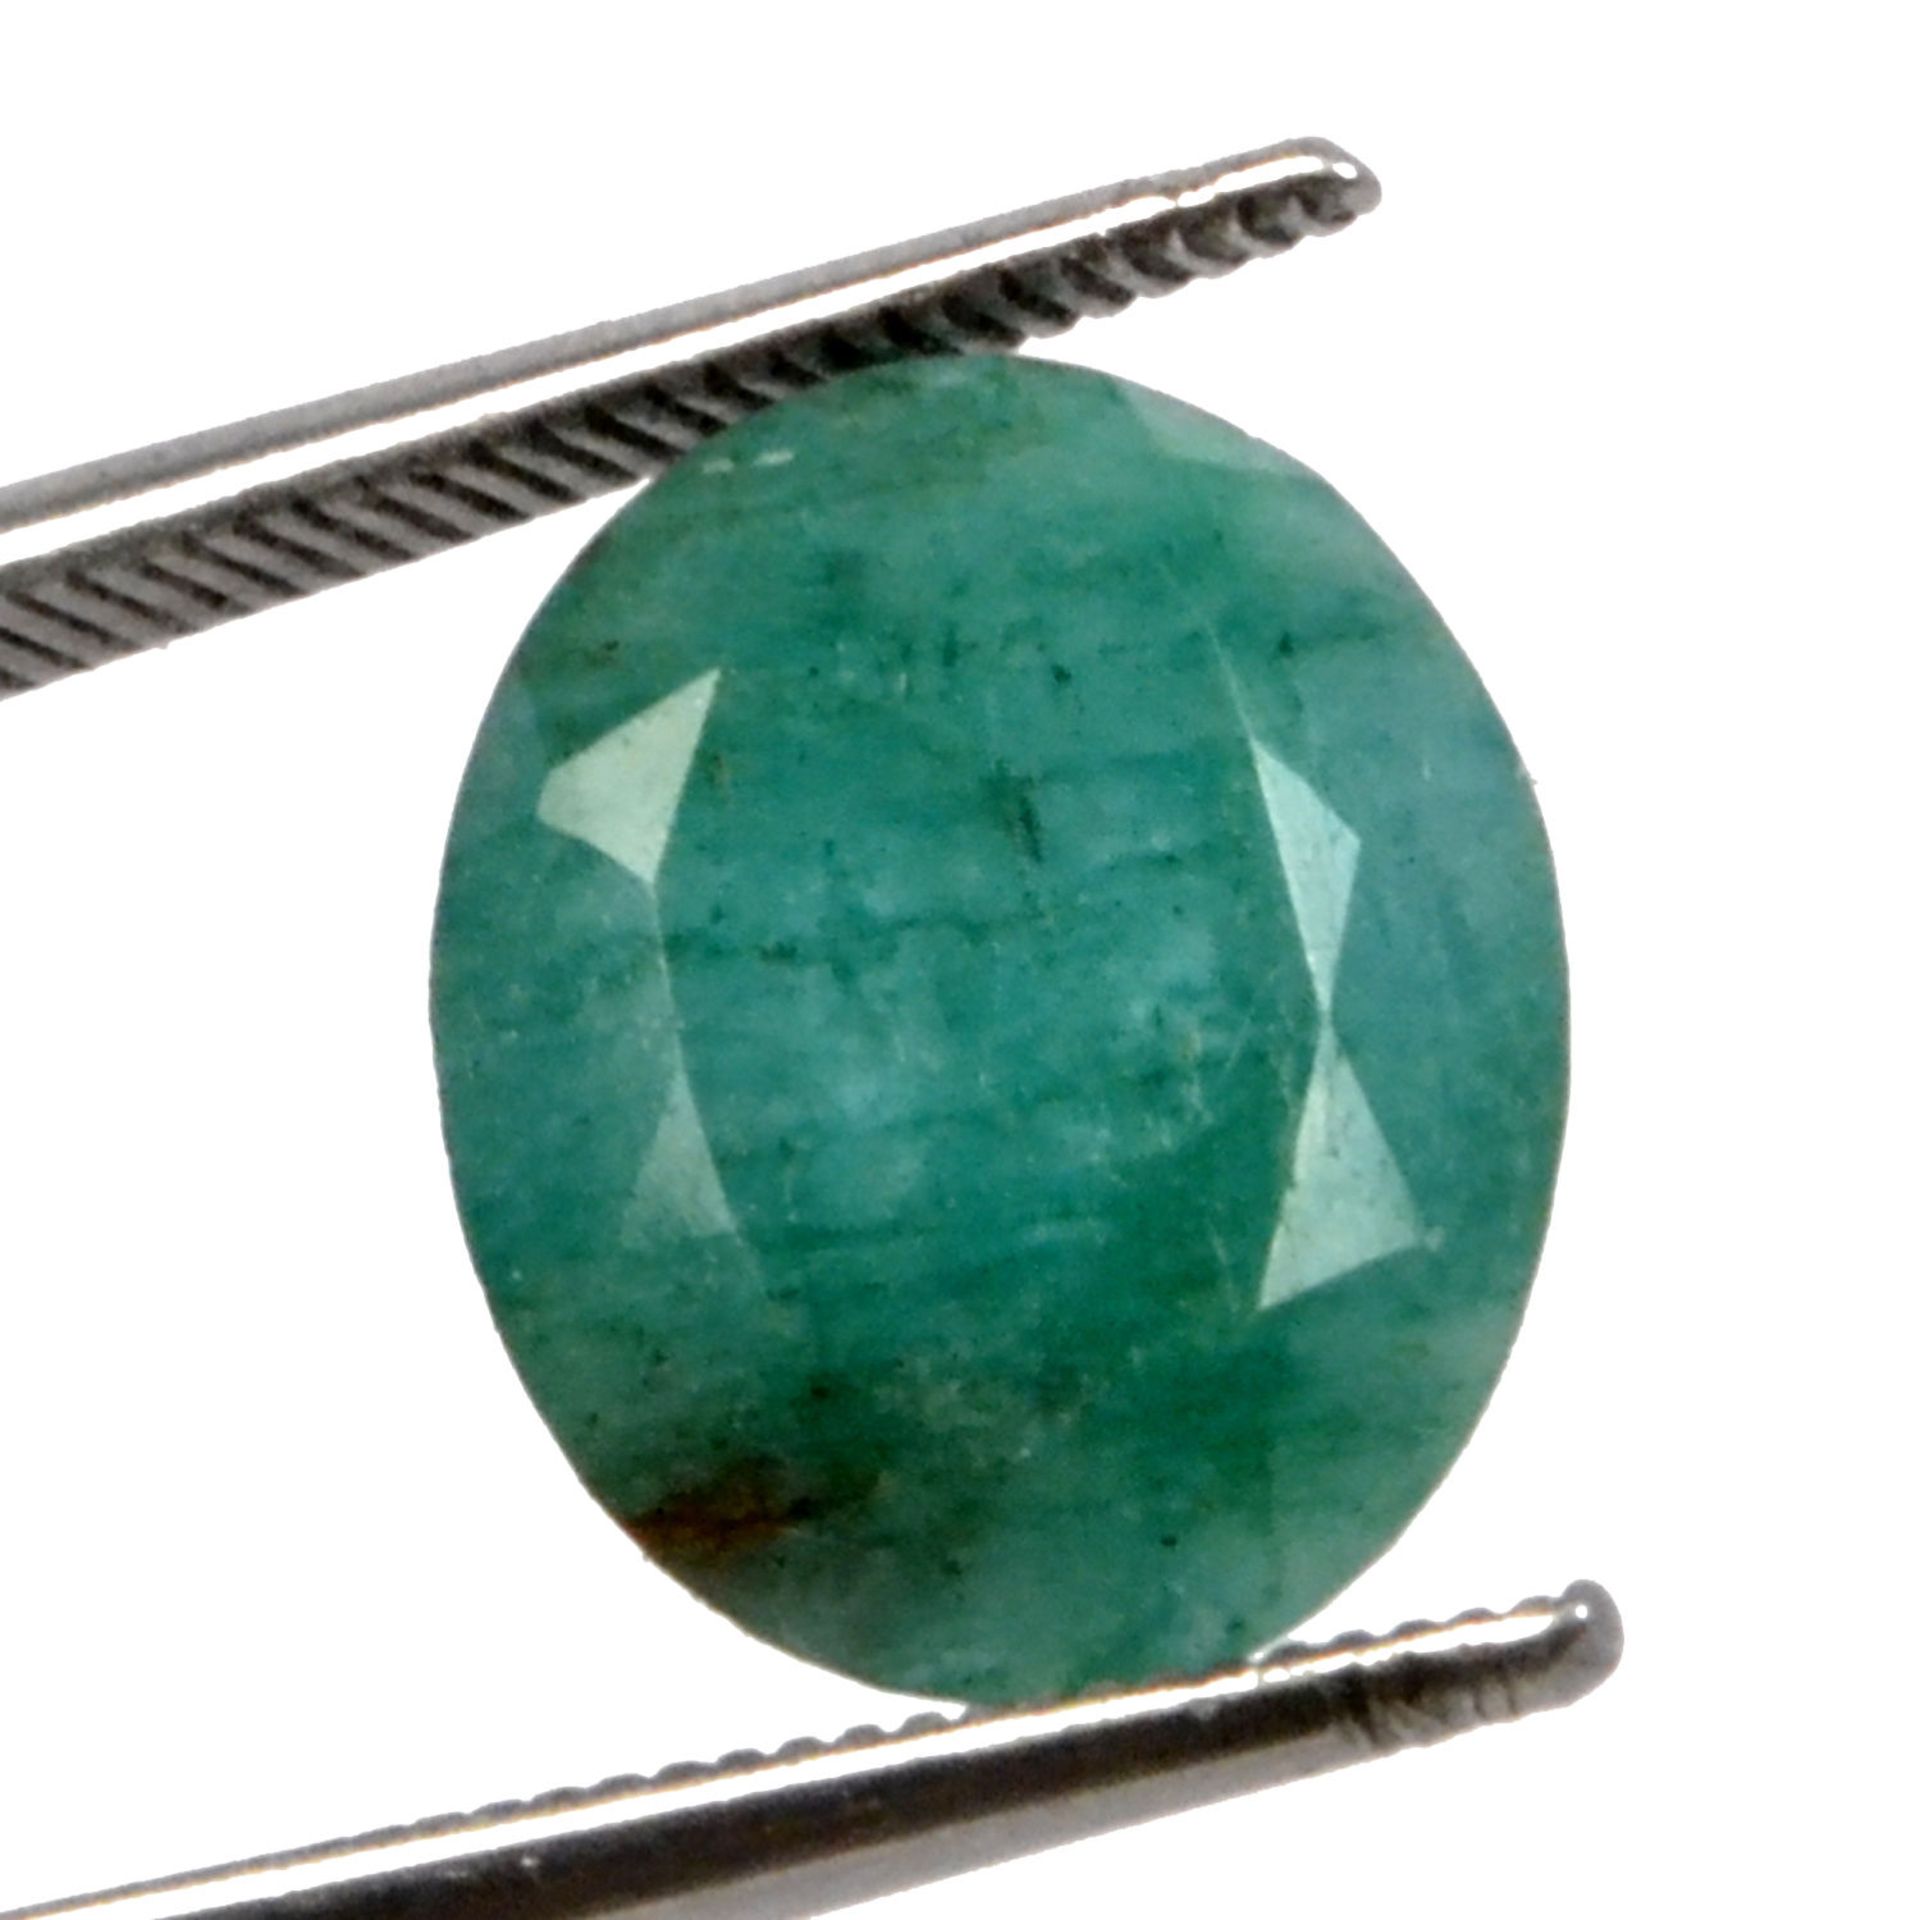 7.51 CT CERTIFIED NATURAL OVAL MIXED GREEN EMERALD LOOSE GEMSTONE